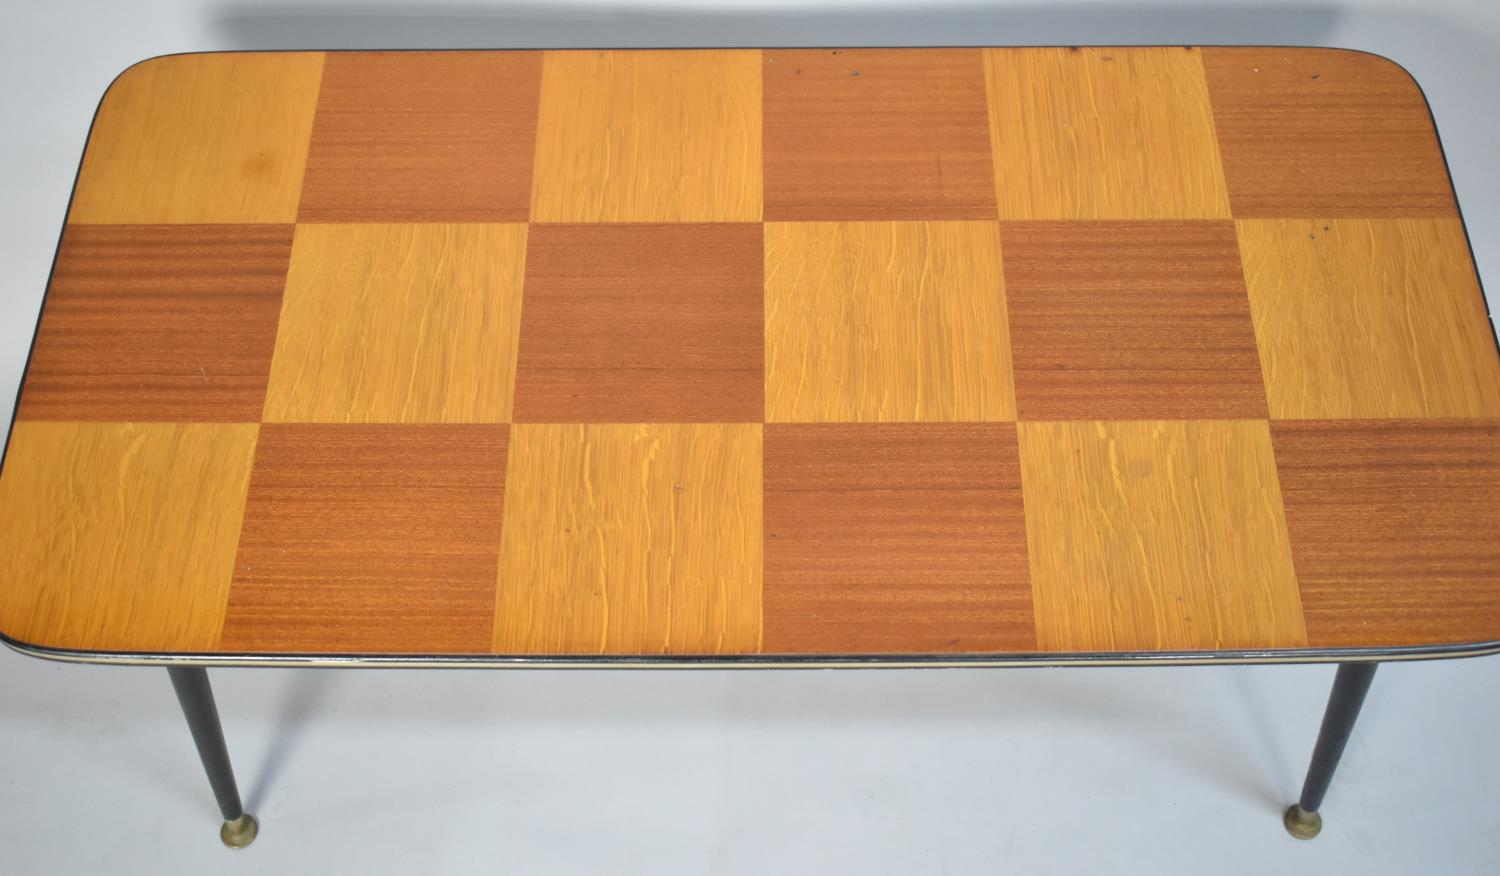 A 1970s Chequer Board Topped Rectangular Coffee Table 90cms Wide - Image 2 of 2